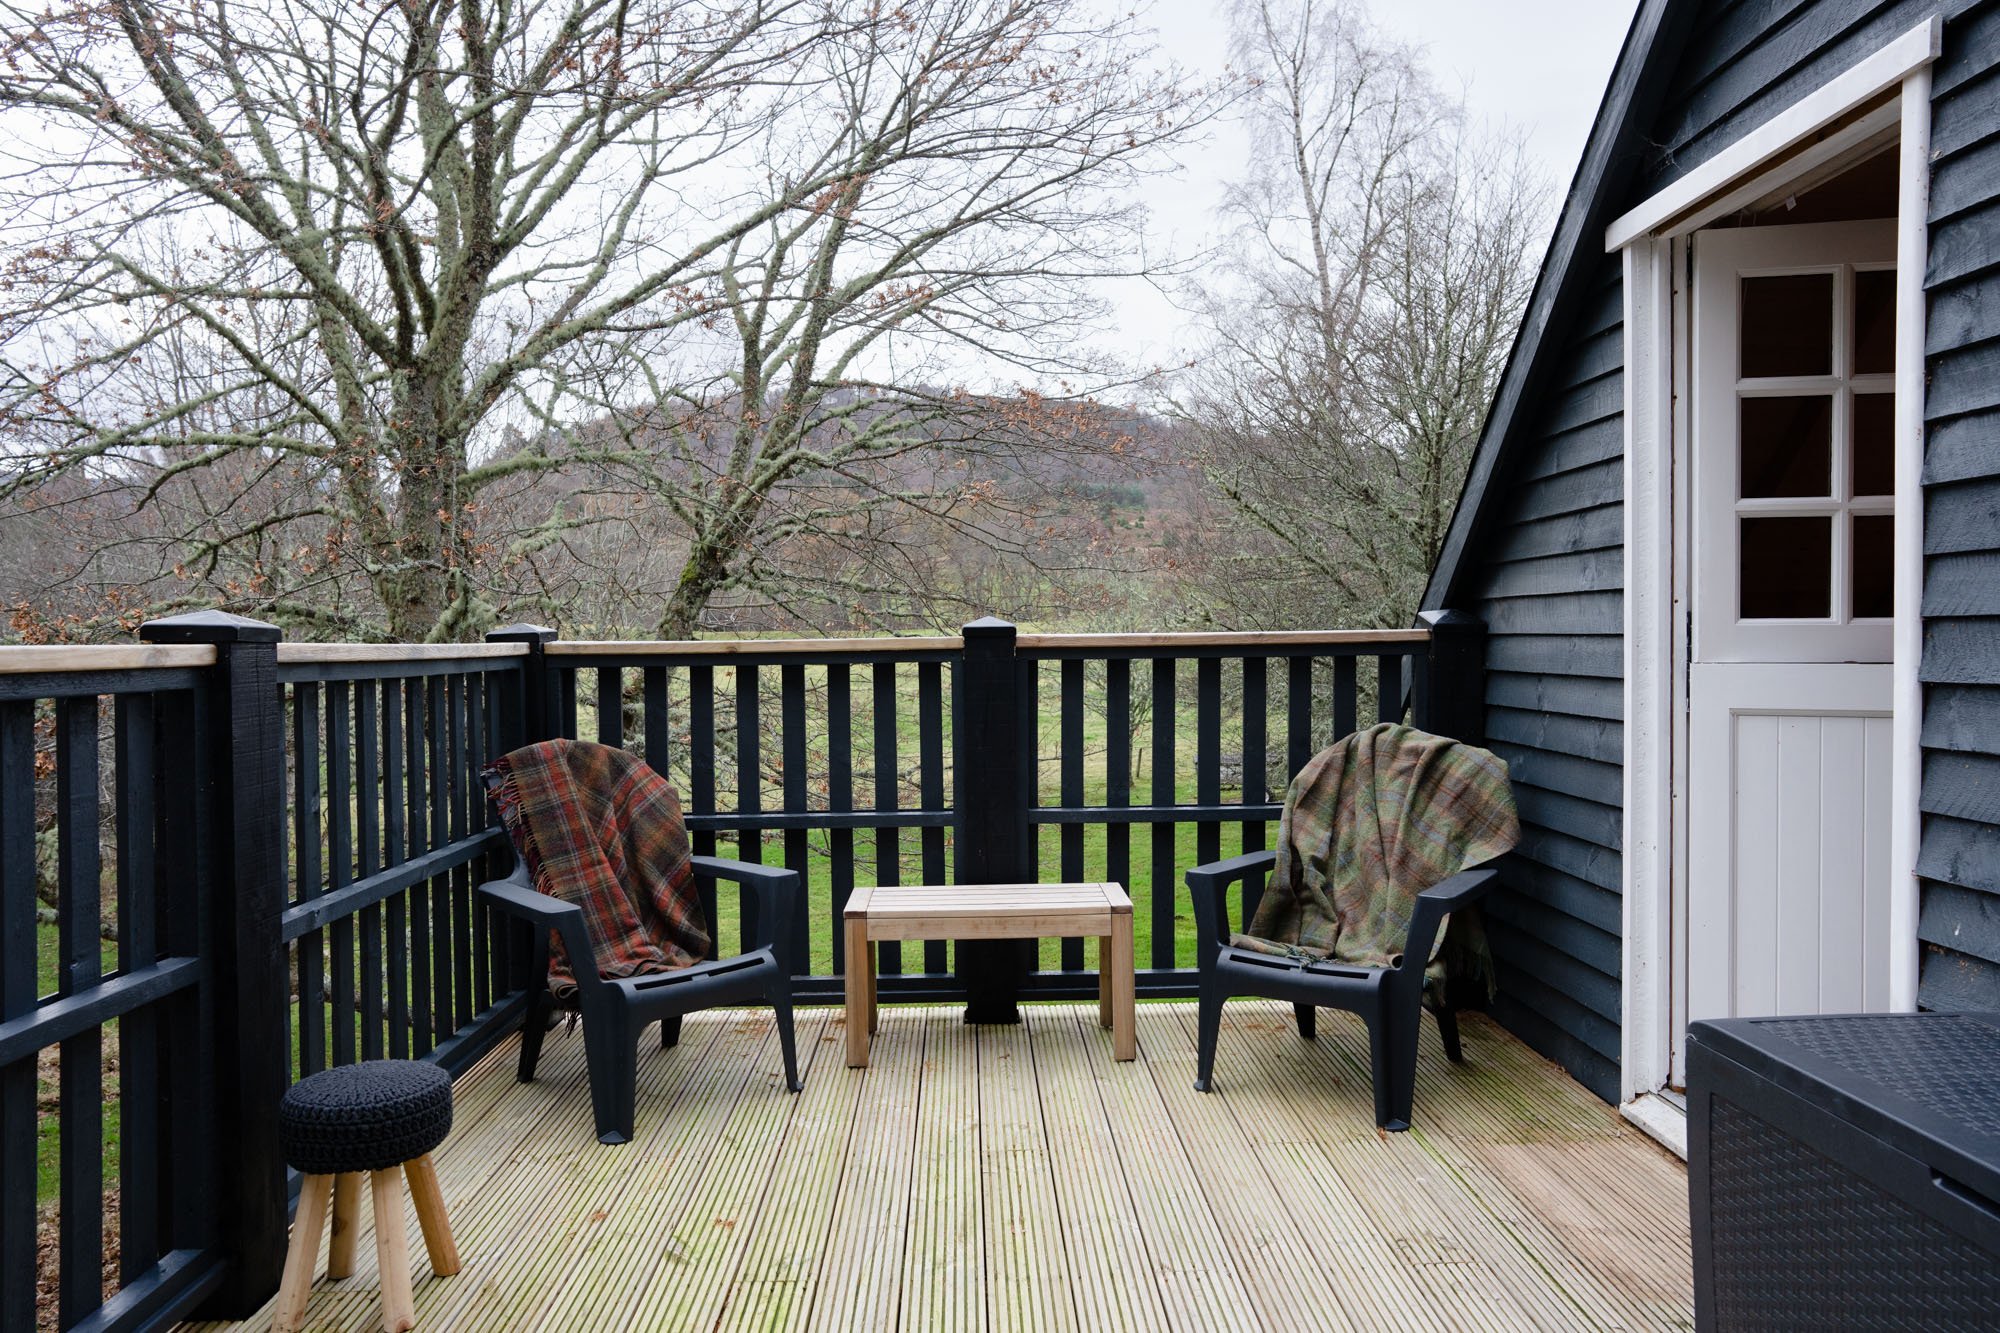 The Hayloft, self catering holiday accommodation in Rothiemurchus, Aviemore, Cairngorms National Park